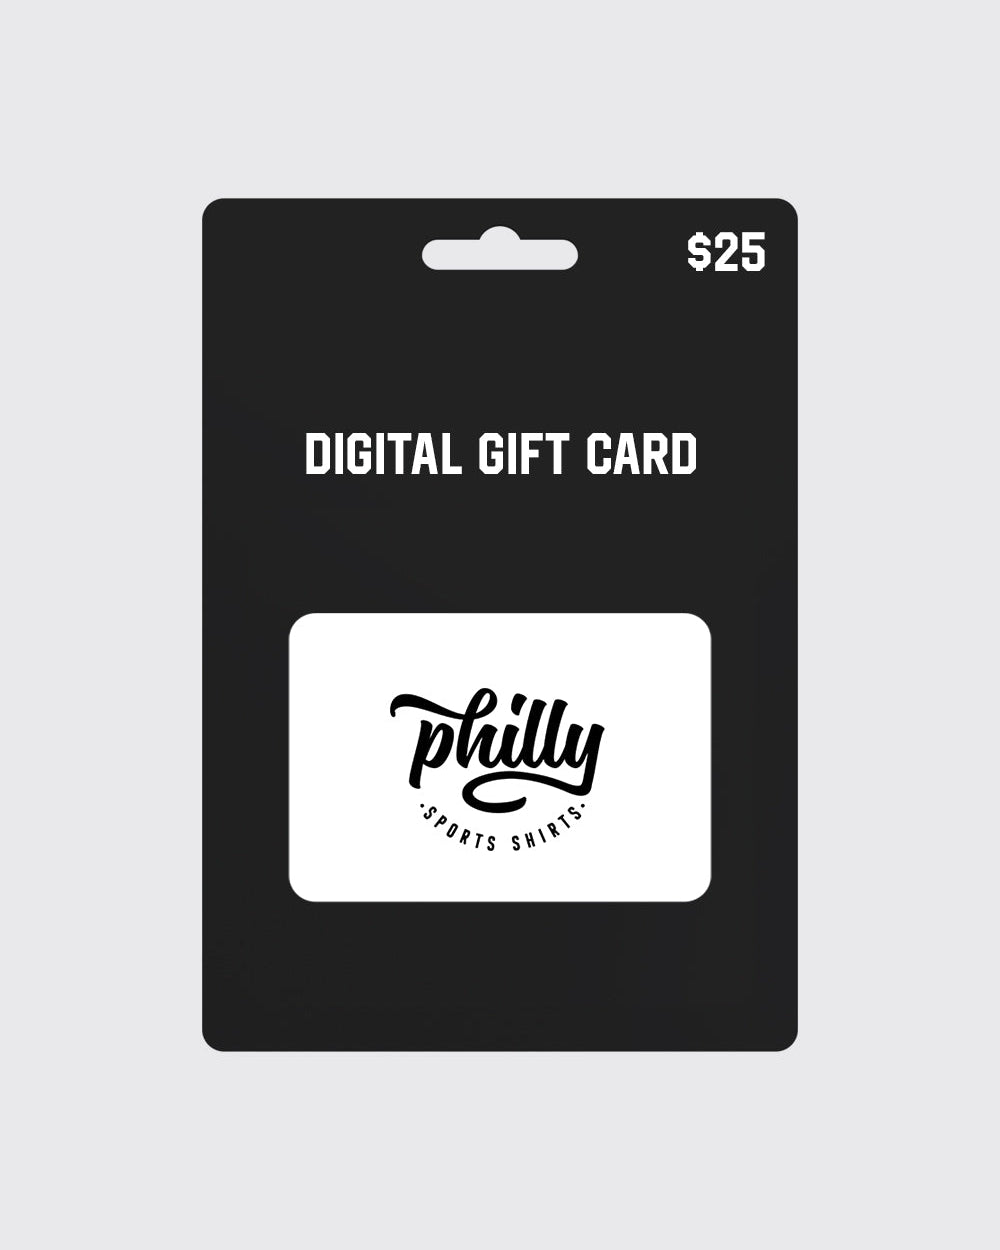 Philly Sports Shirts Digital Gift Card - Philly - Philly Sports Shirts